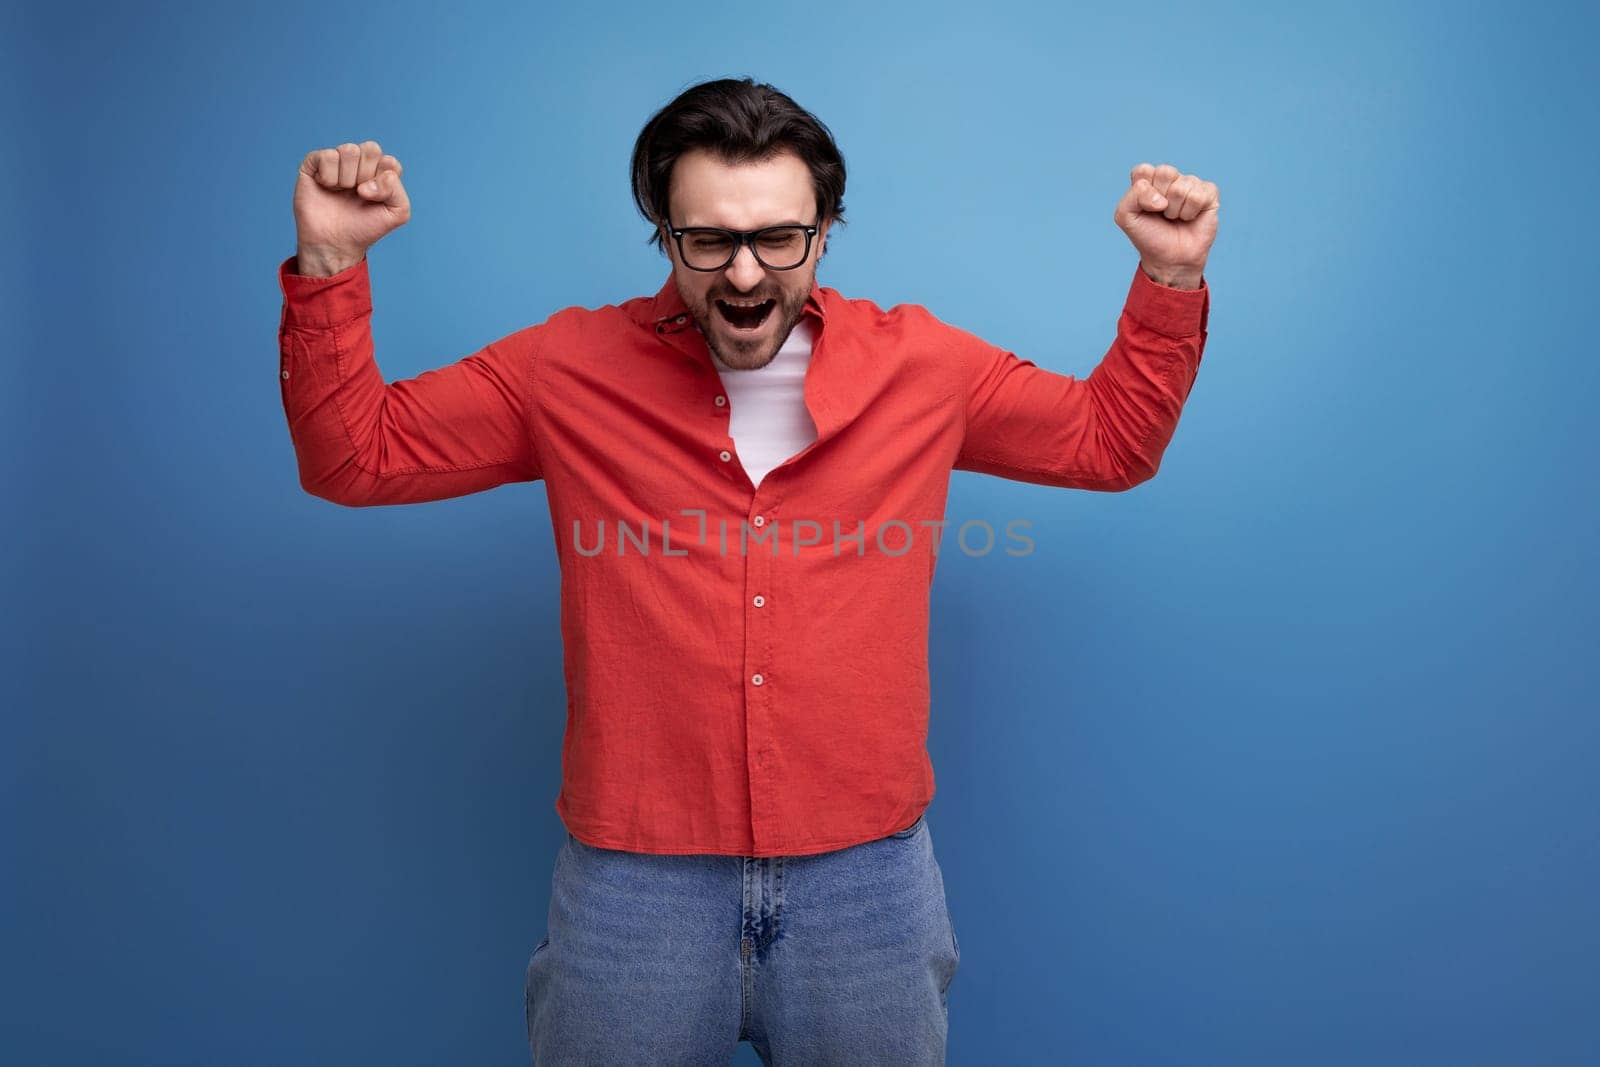 joyful 35 year old brunette millennial man with gorgeous hair in a red shirt.